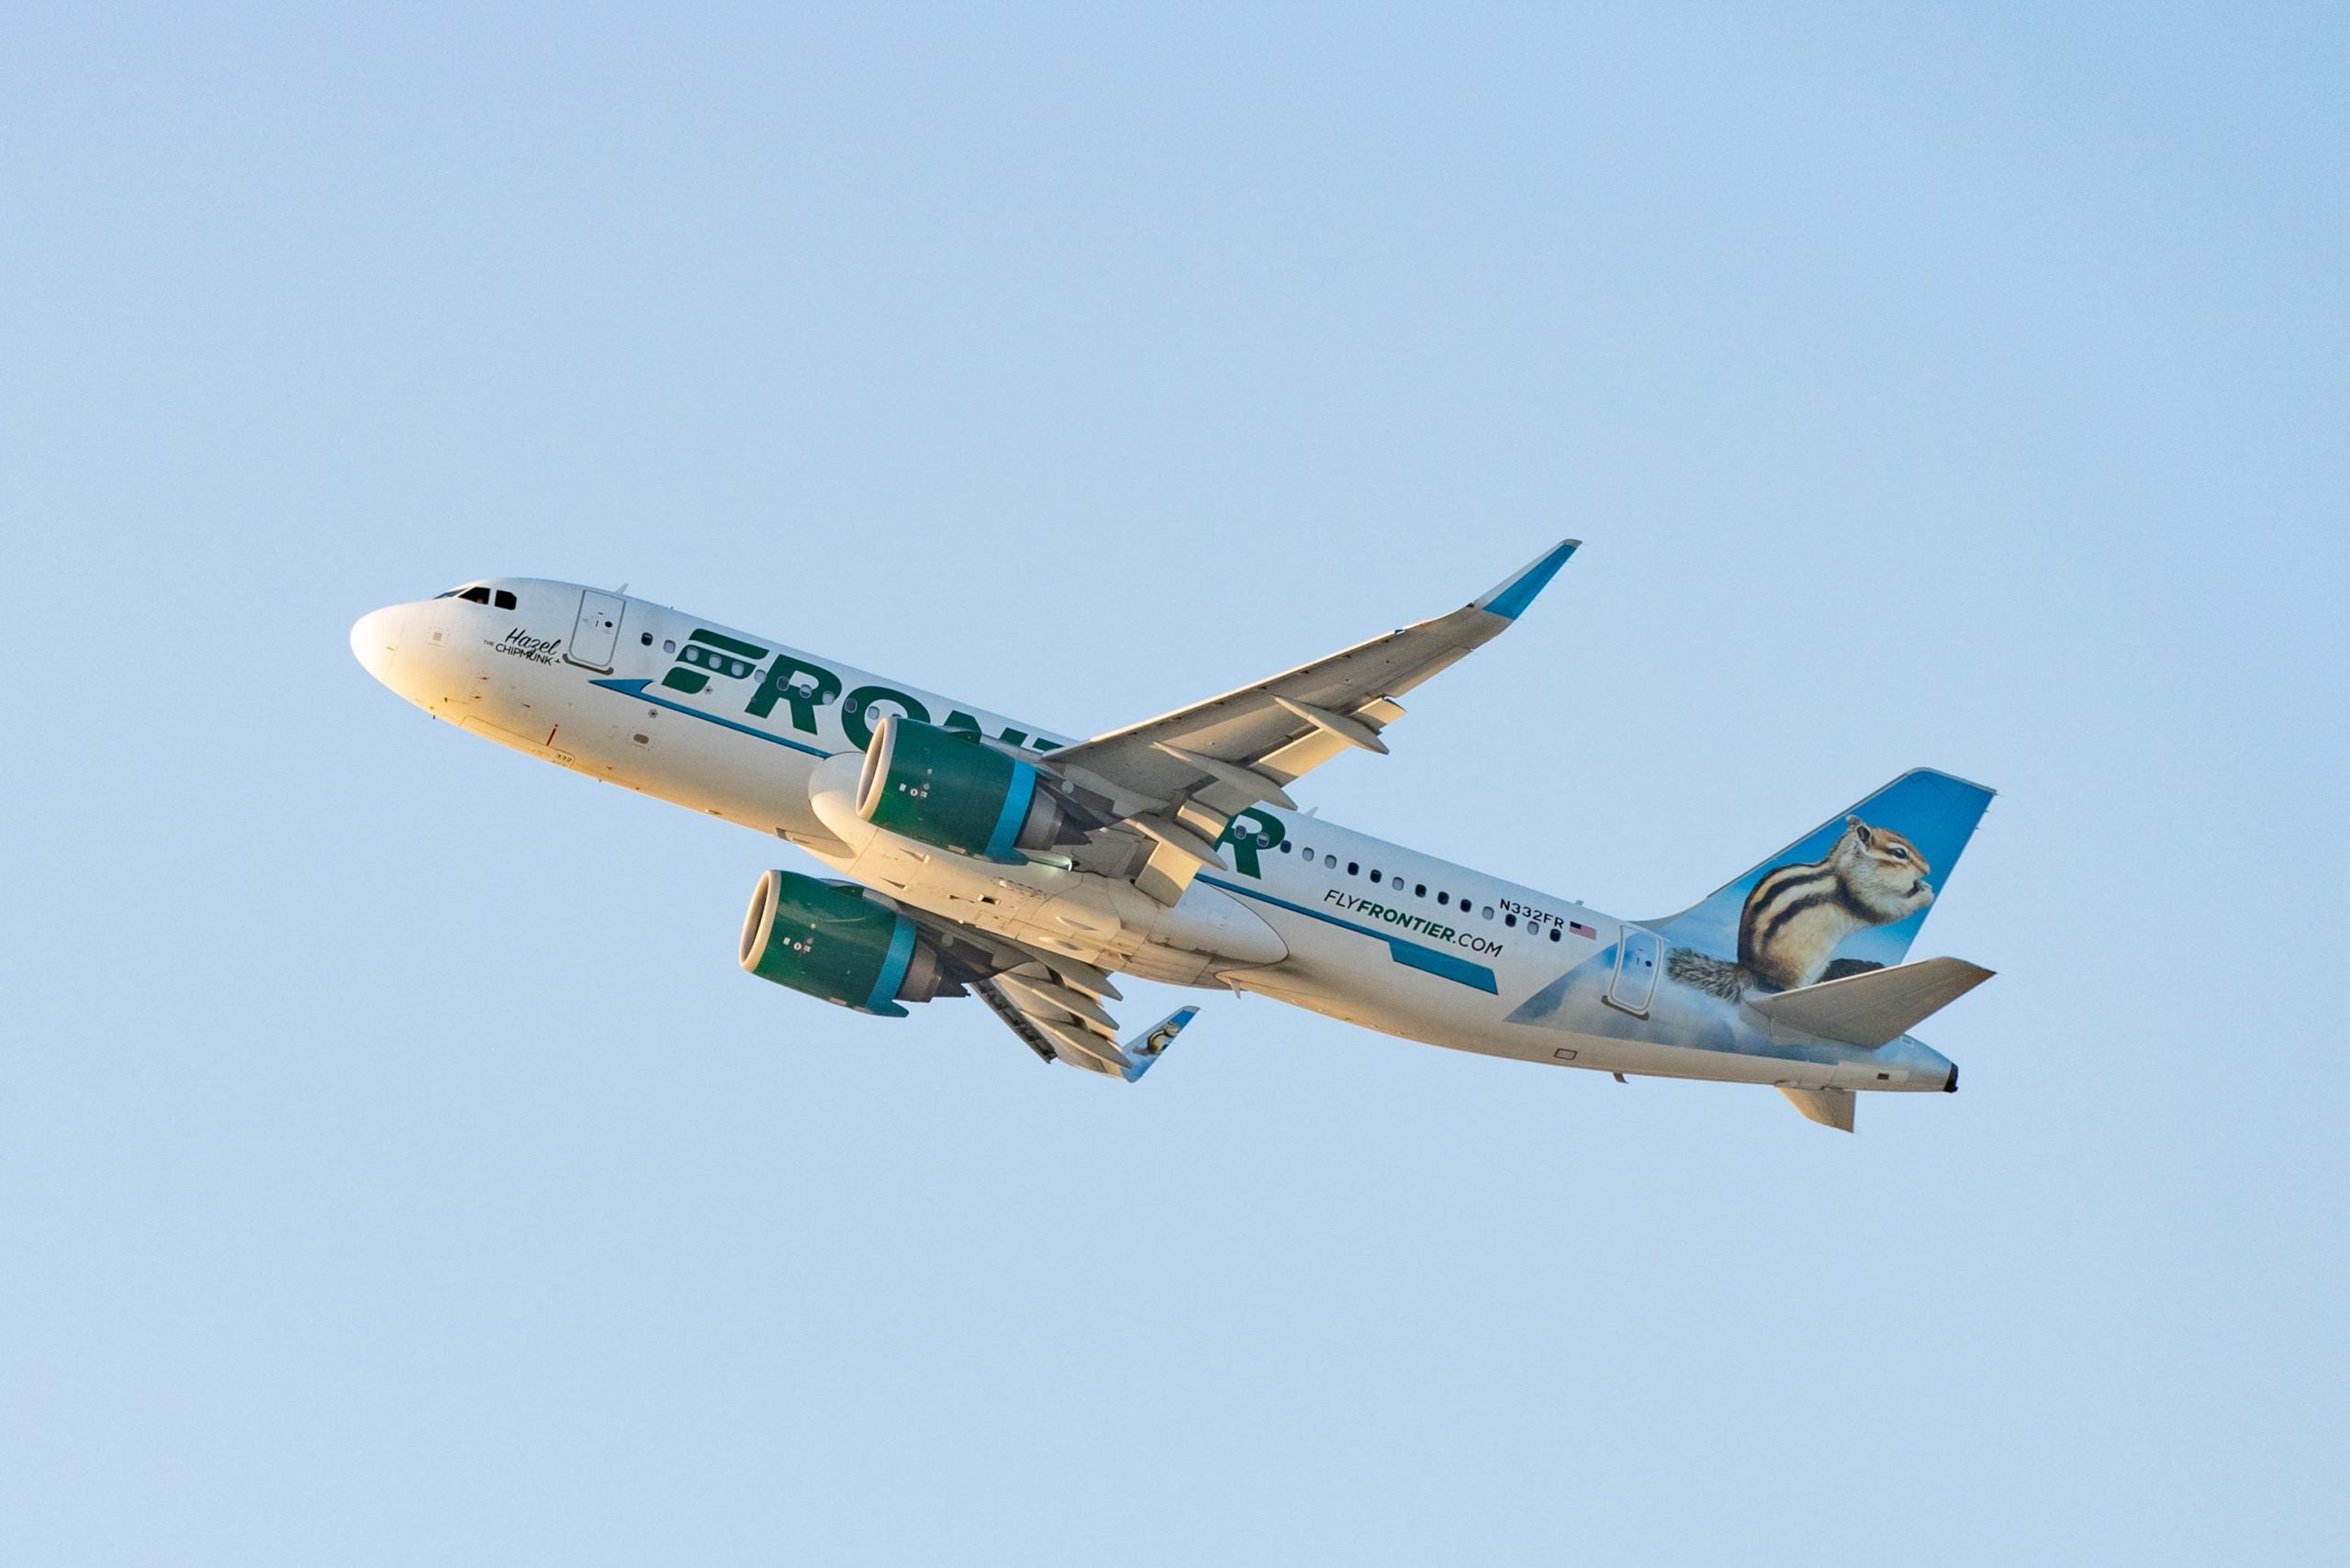 LOS ANGELES, CA - AUGUST 27: Frontier Airlines Airbus A320 takes off from Los Angeles international Airport on August 27, 2020 in Los Angeles, California. (Photo by AaronP/Bauer-Griffin/GC Images)